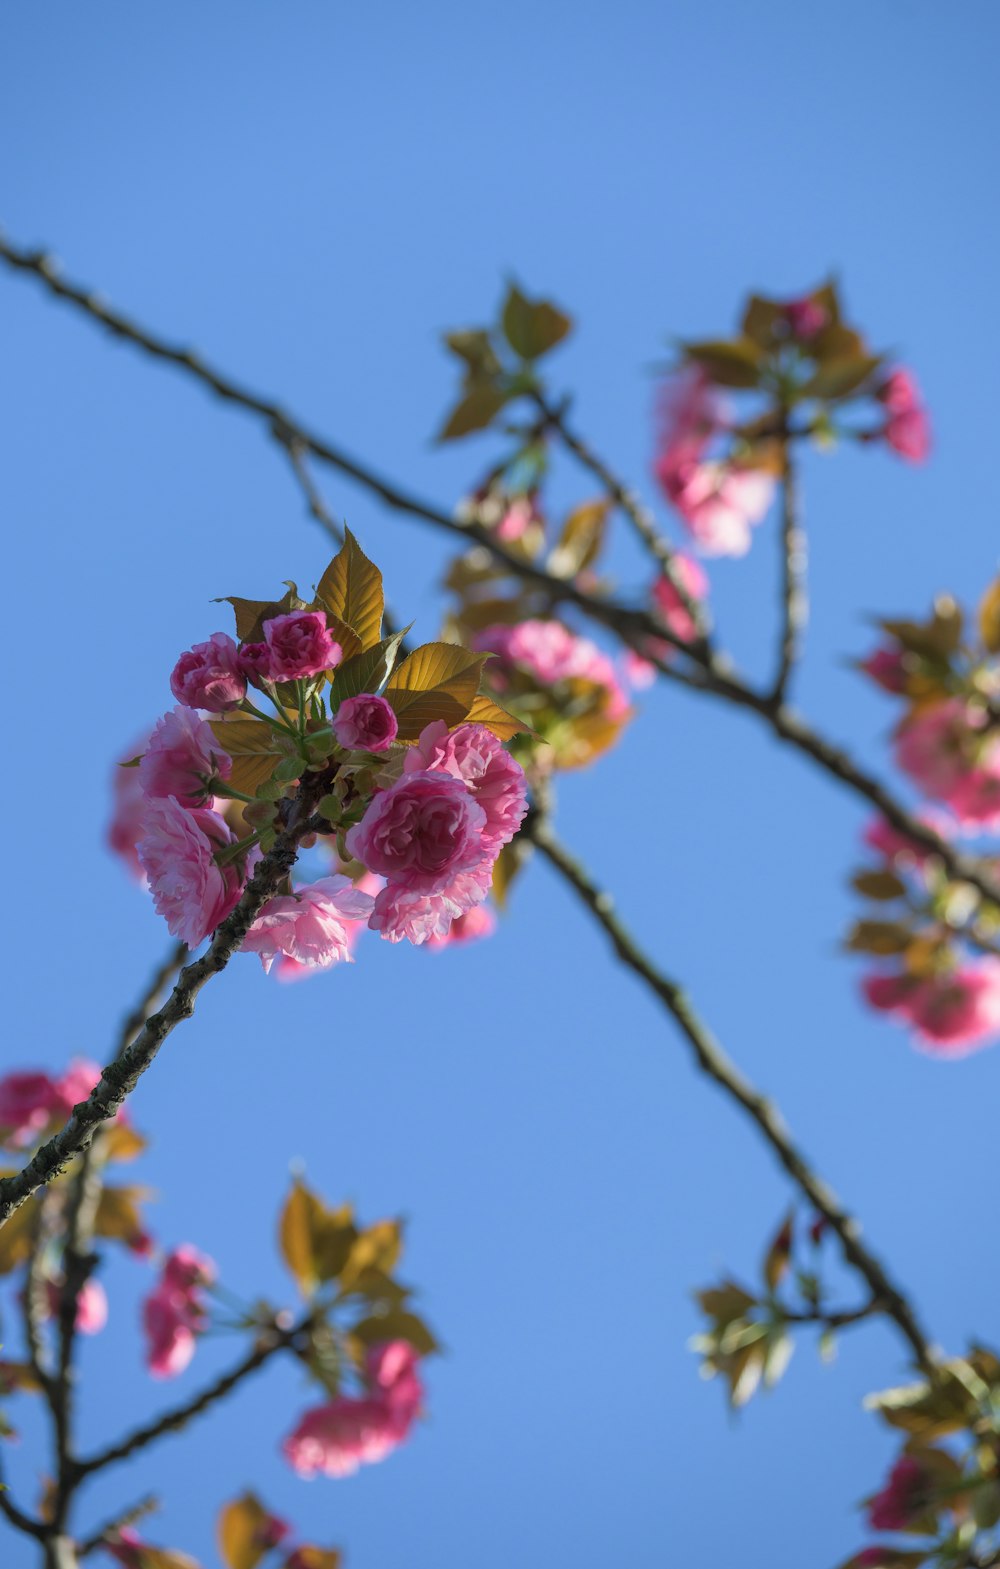 pink flowers blooming on a tree branch against a blue sky